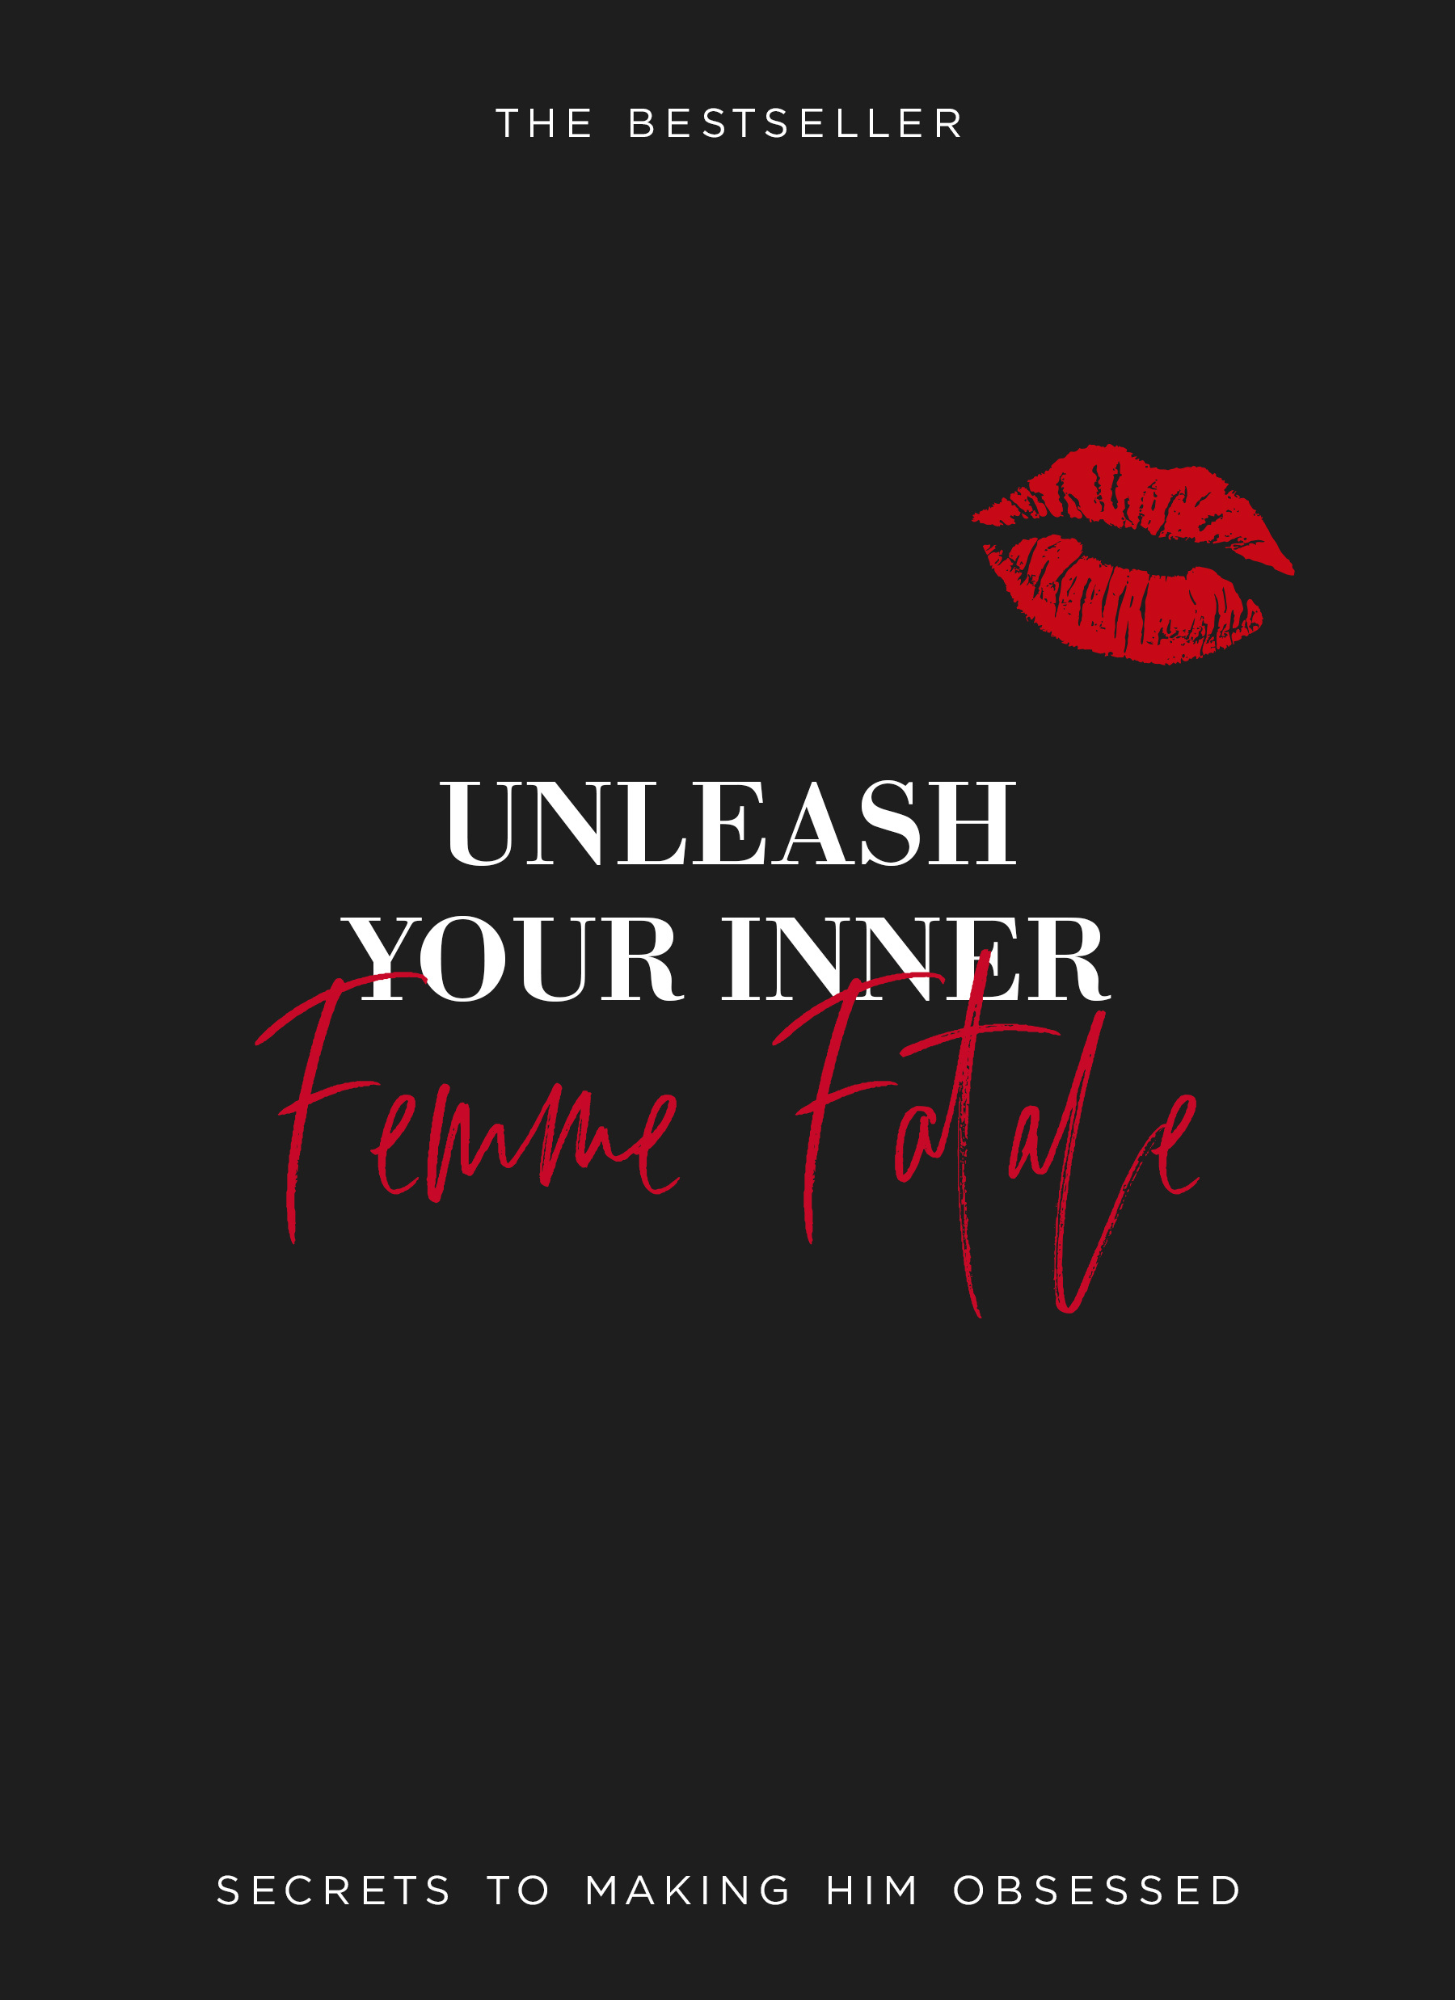 Unleash Your Inner Femme Fatale-Secrets To Making Him Obsessed